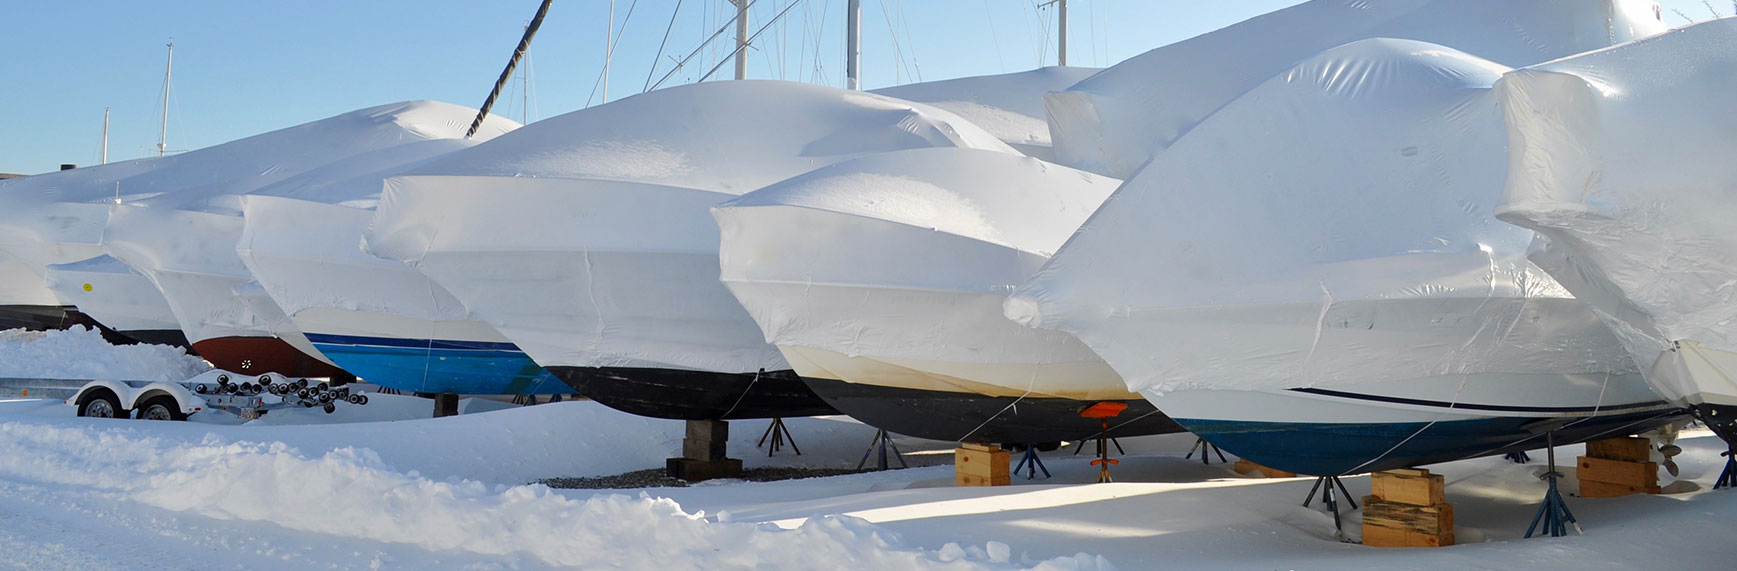 Shrink-Wrapping Boats